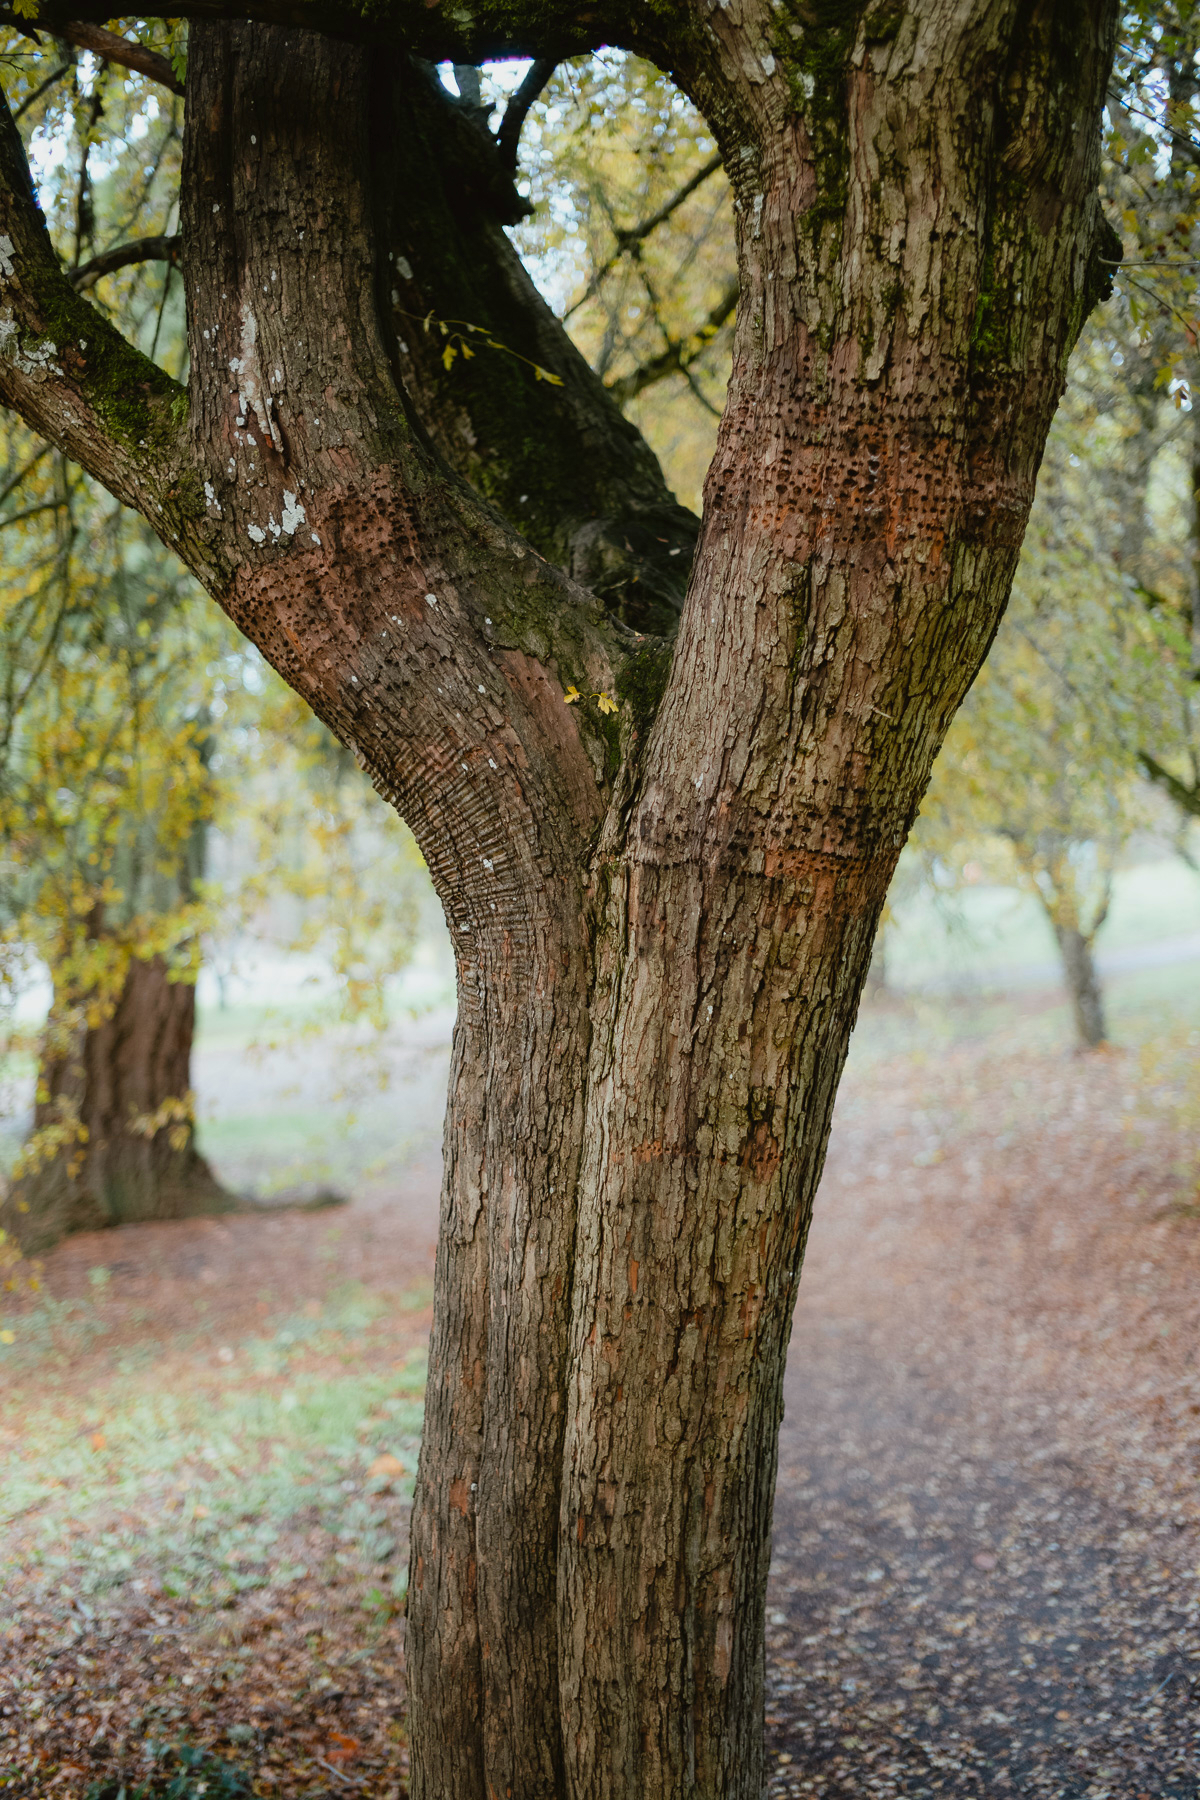 A tree trunk is in focus in the center of the frame. The background shows softly blurred trees. The ground is full of yellow leaves. The tree bark has various marks of lines and holes.